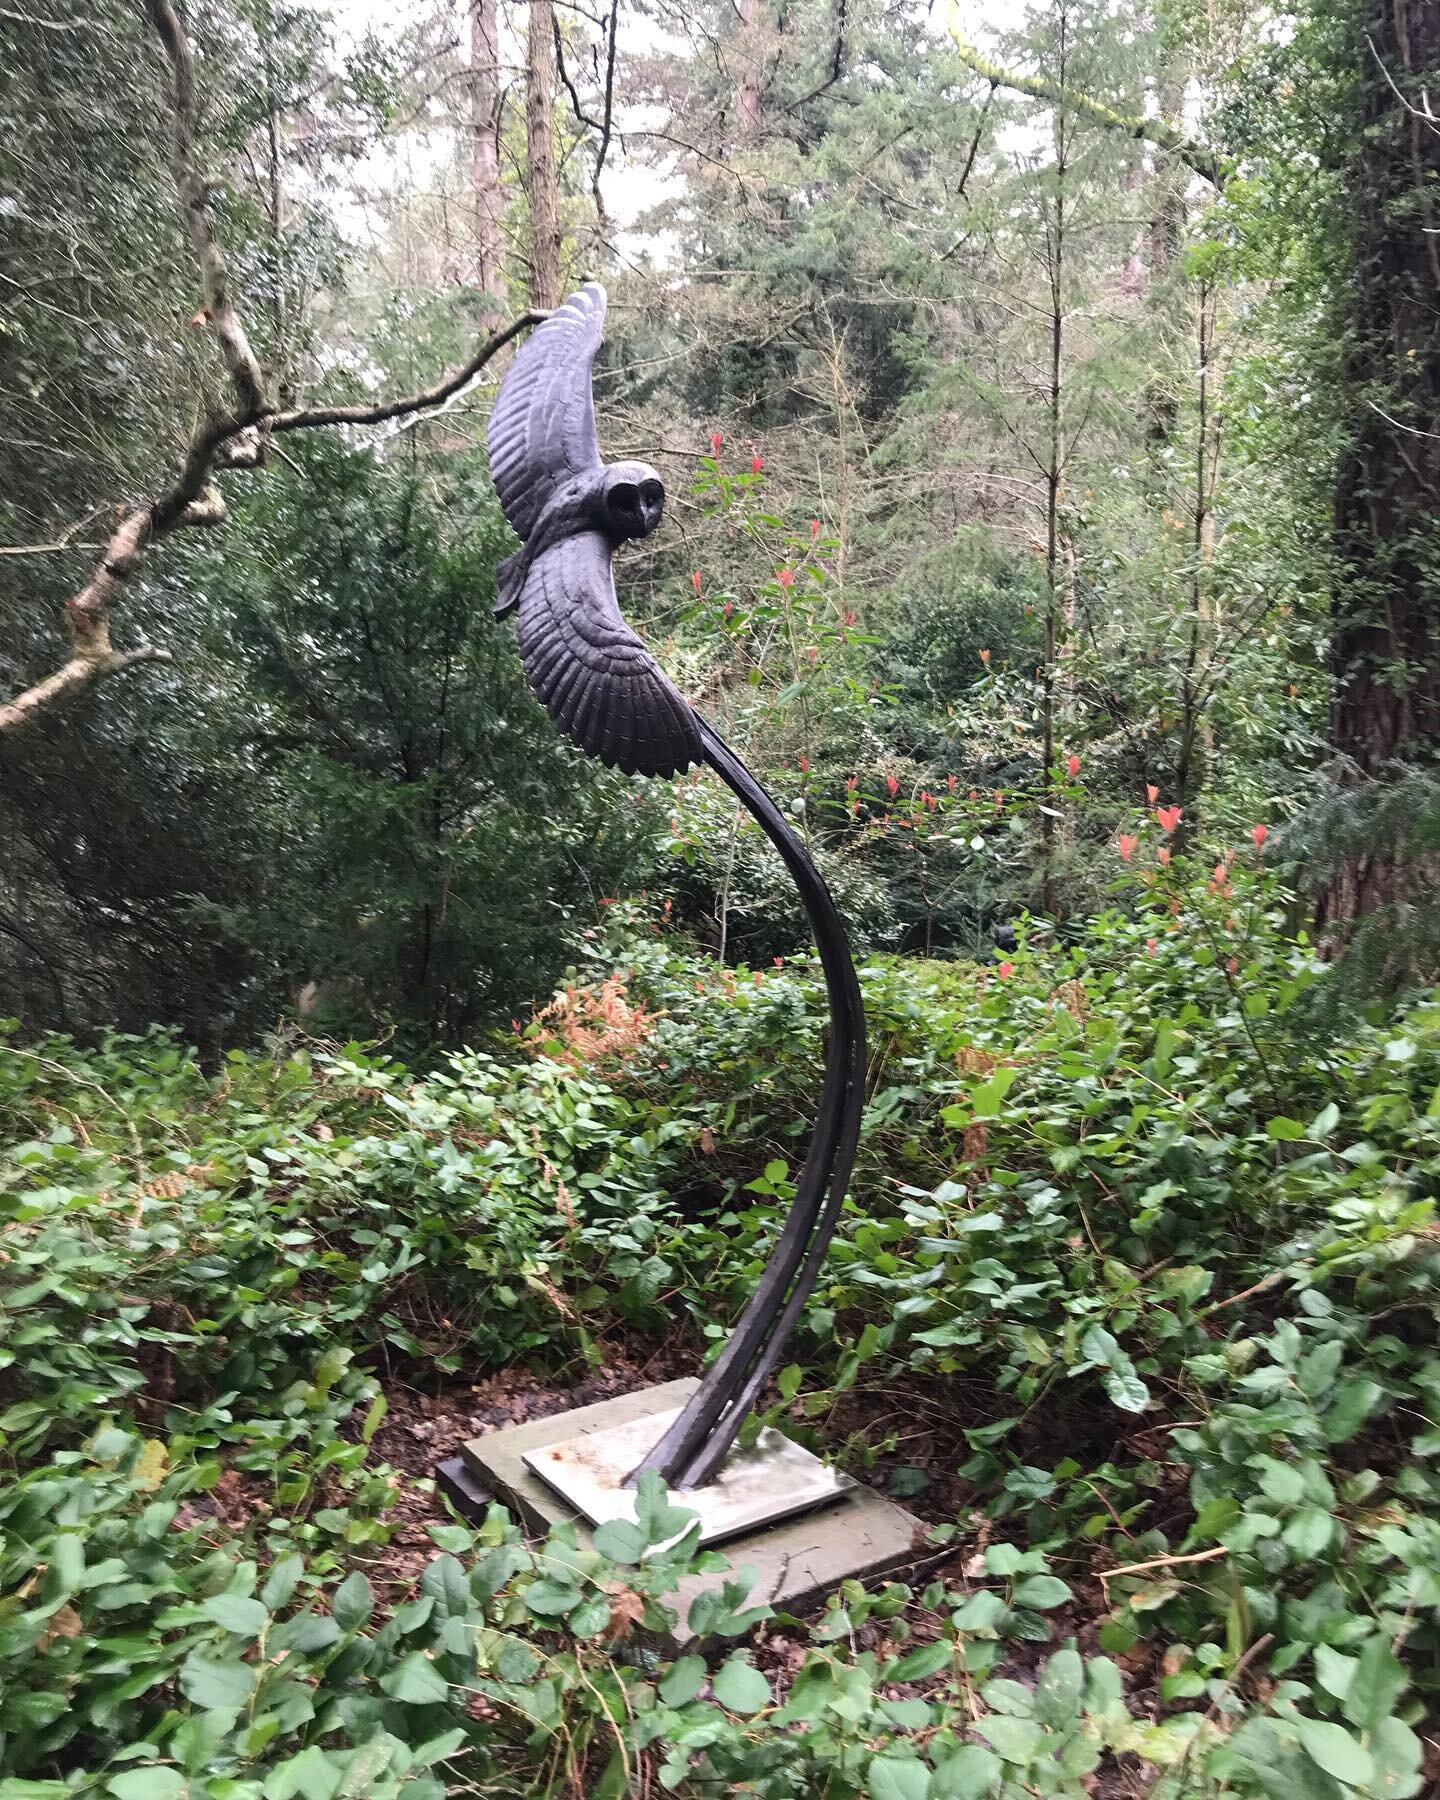 As a birthday treat, visited @thesculpturepark near Farnham Surrey yesterday. It was mind-blowing to see so much fantastic contemporary sculpture all in one place; loved it!
#thesculpturepark 
#dayout 
#contemporarysculpture